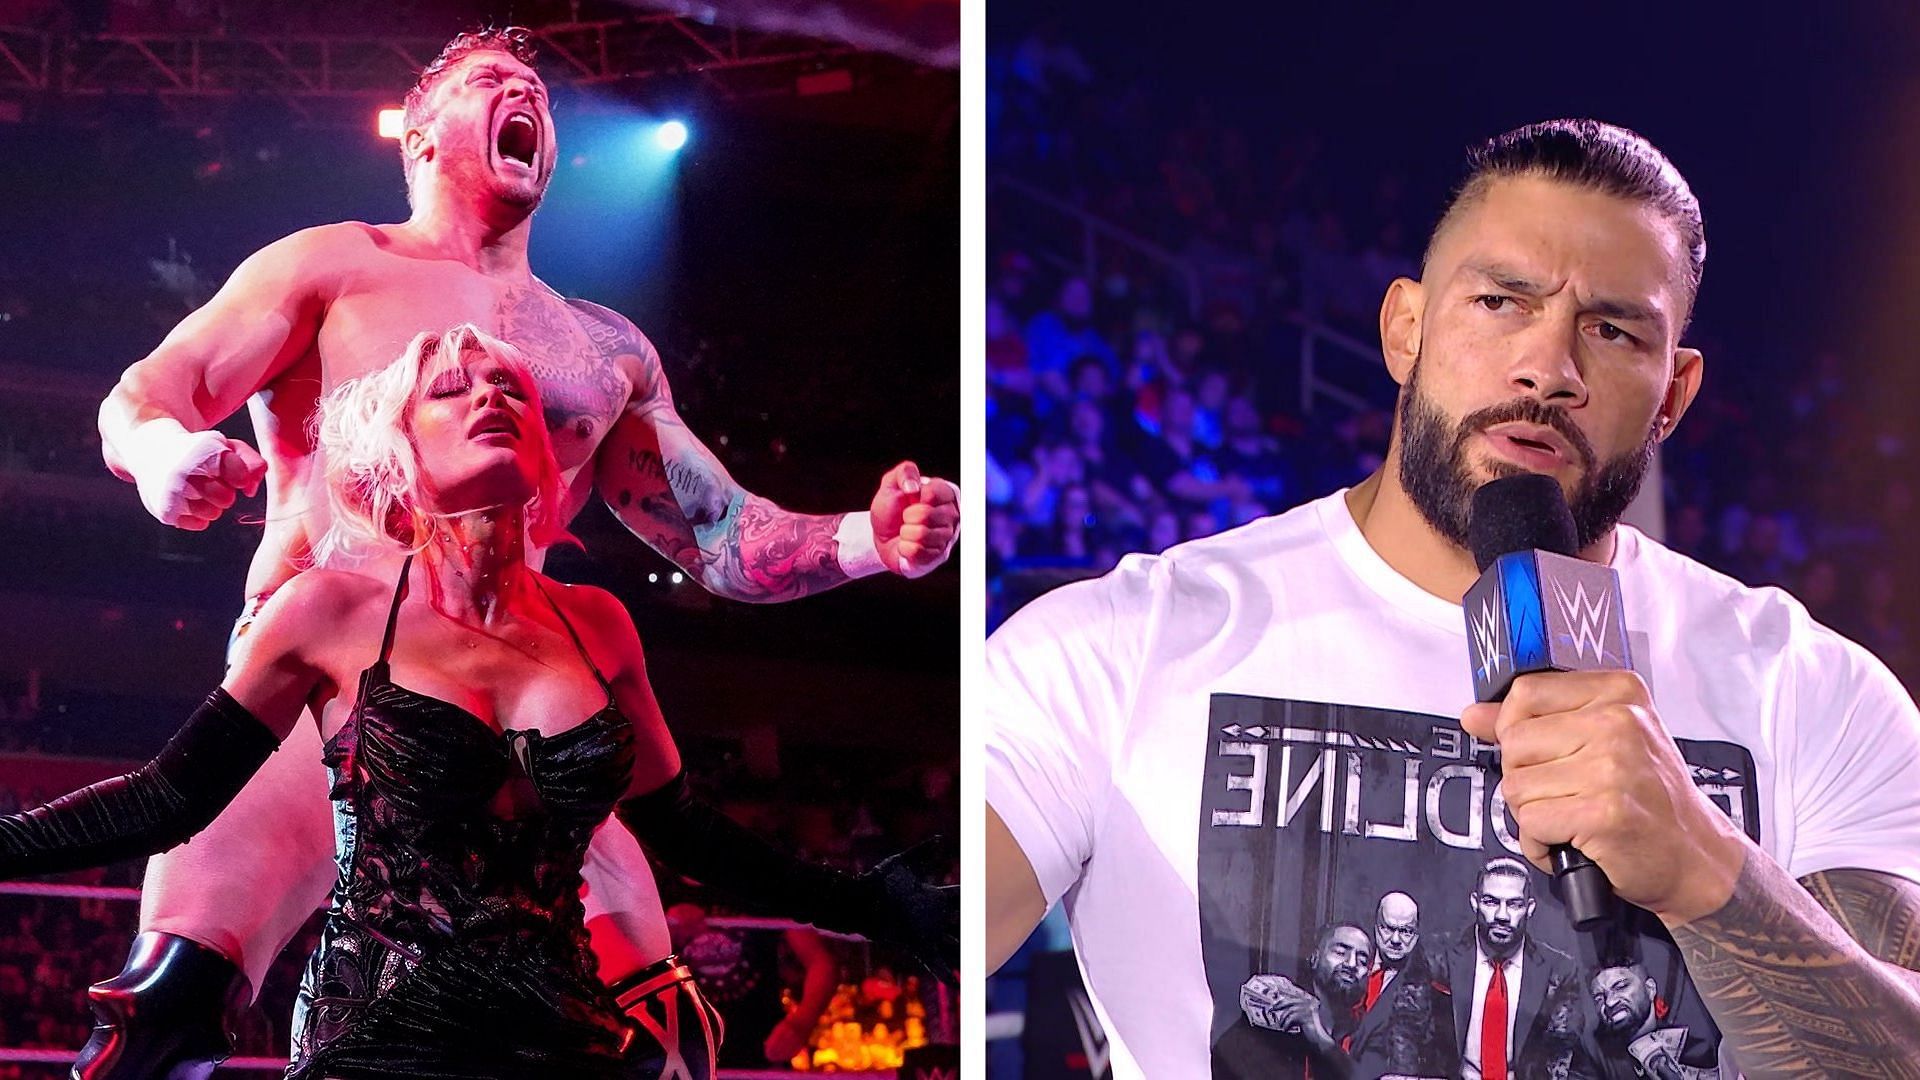 Karrion Kross and Roman Reigns may be a major feud on WWE SmackDown